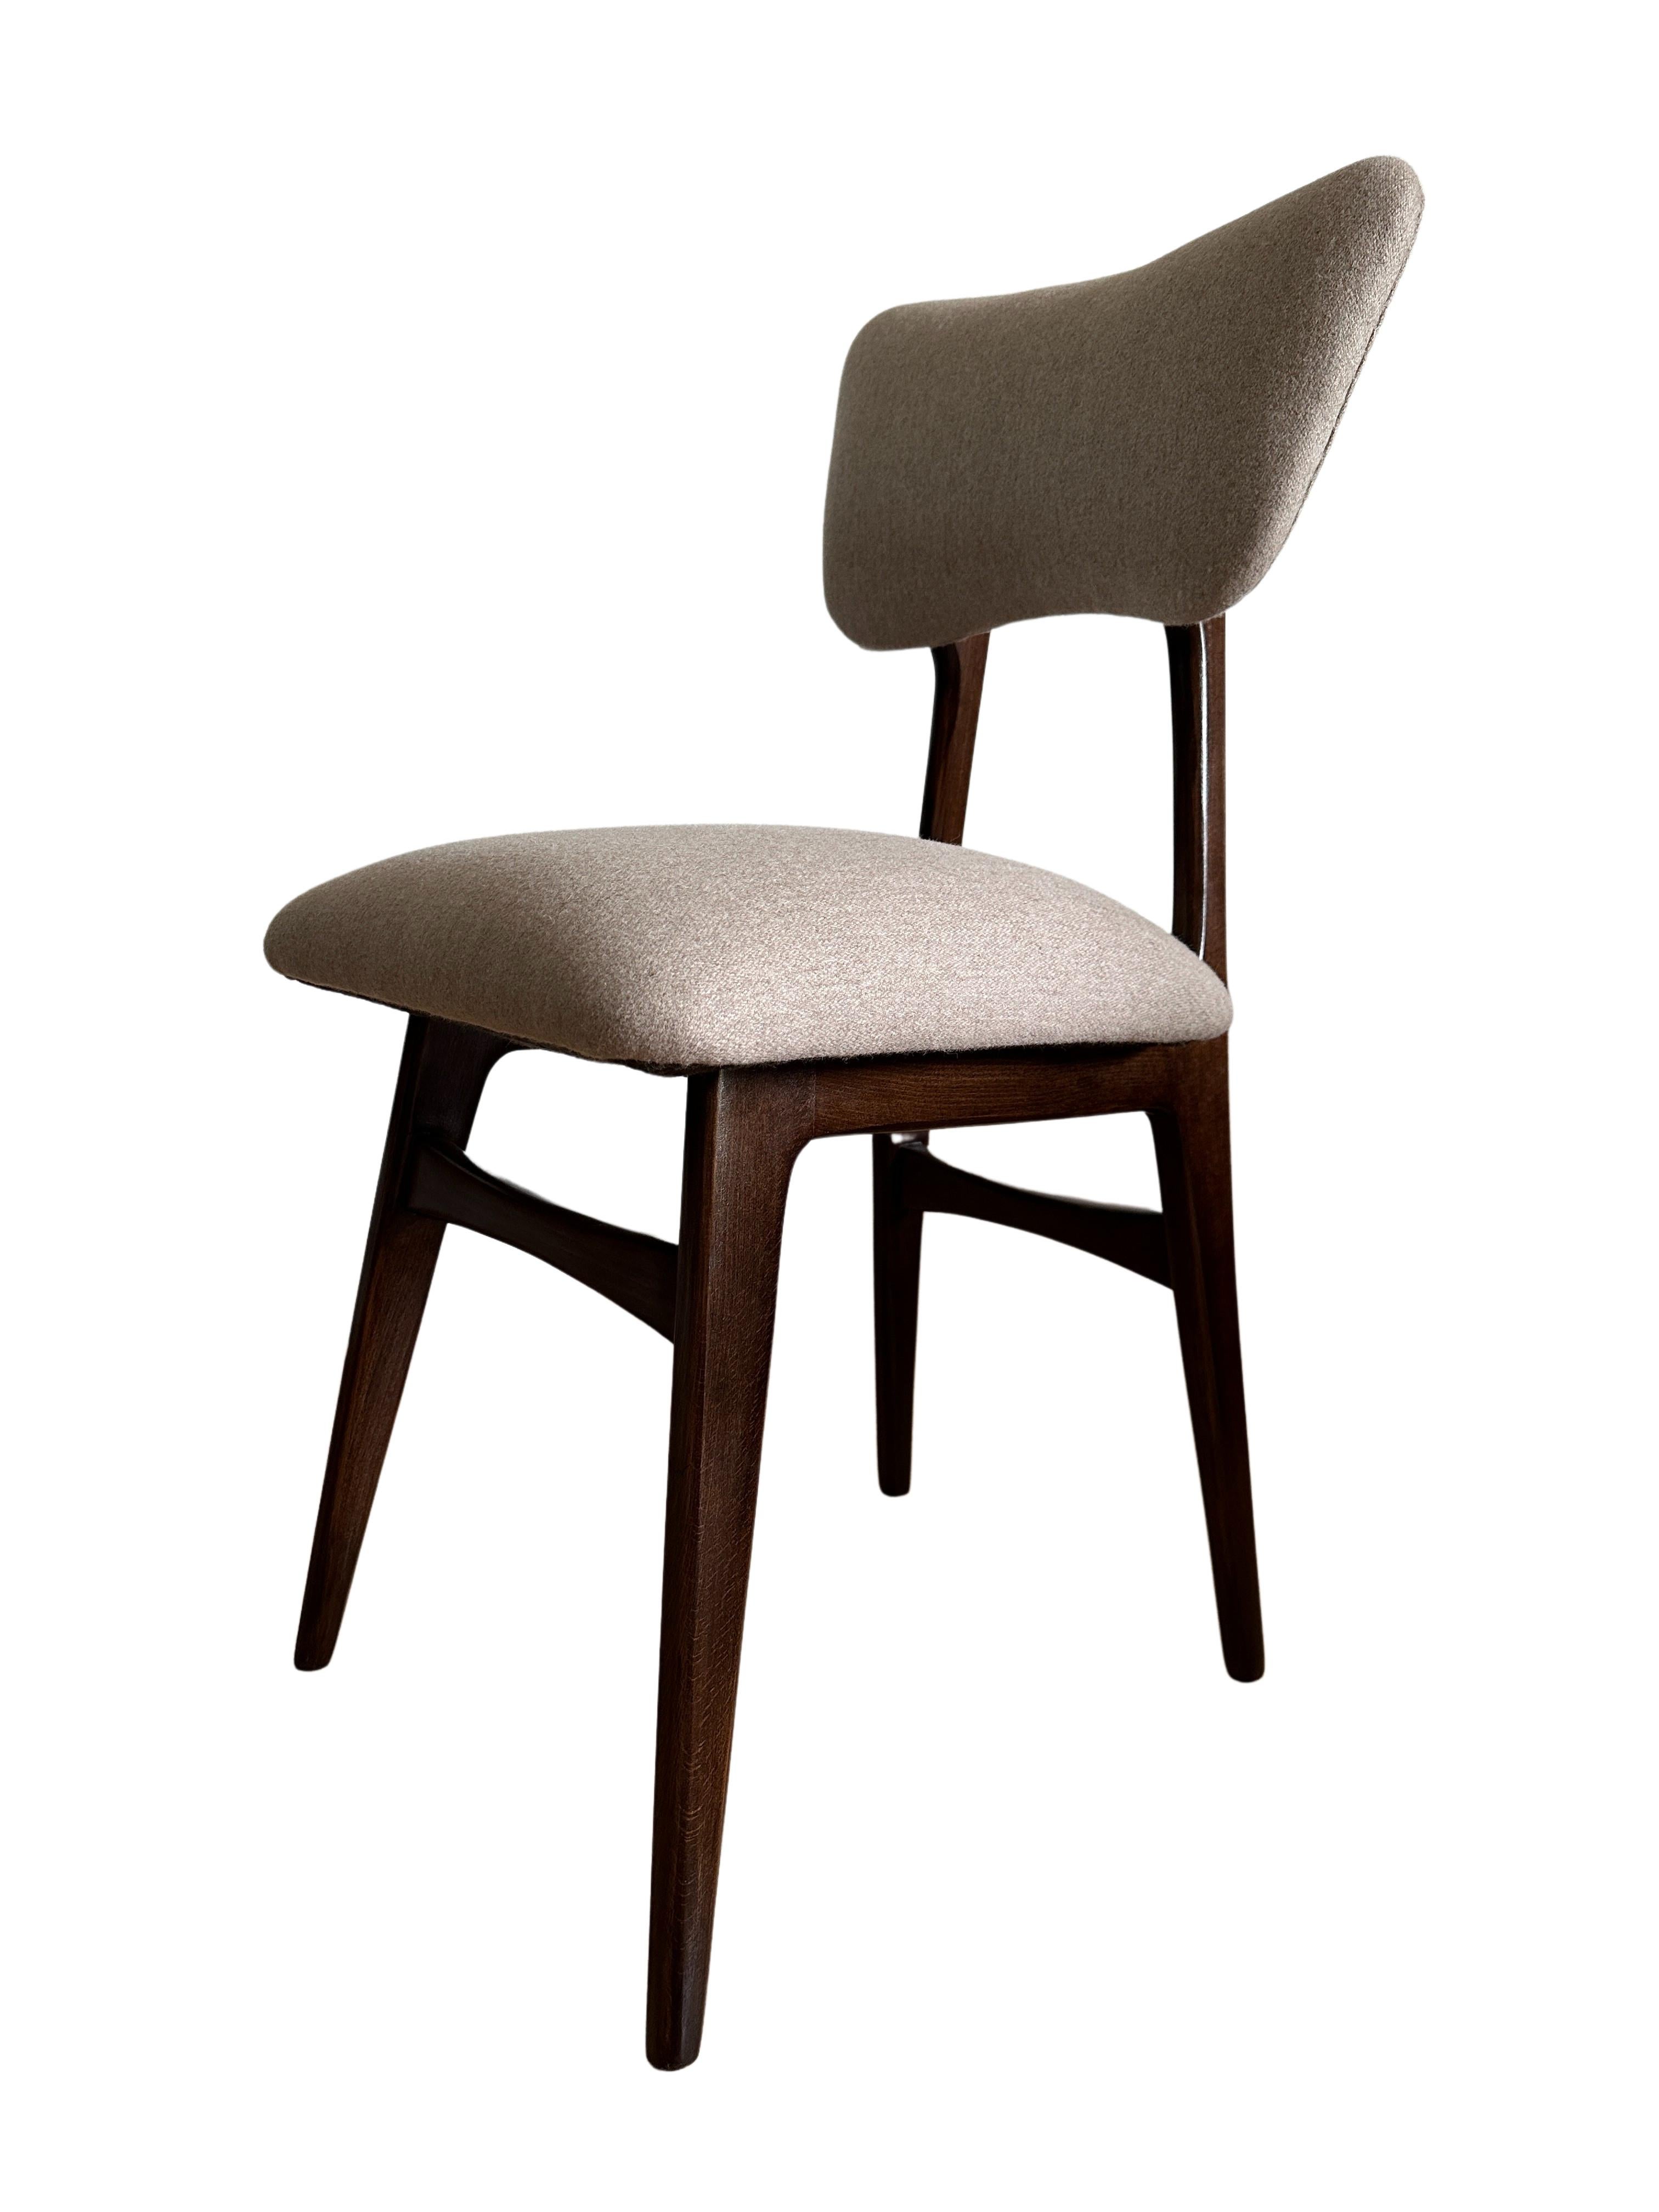 20th Century Midcentury Dining Chair in Beige Wool Upholstery, Poland, 1960s For Sale